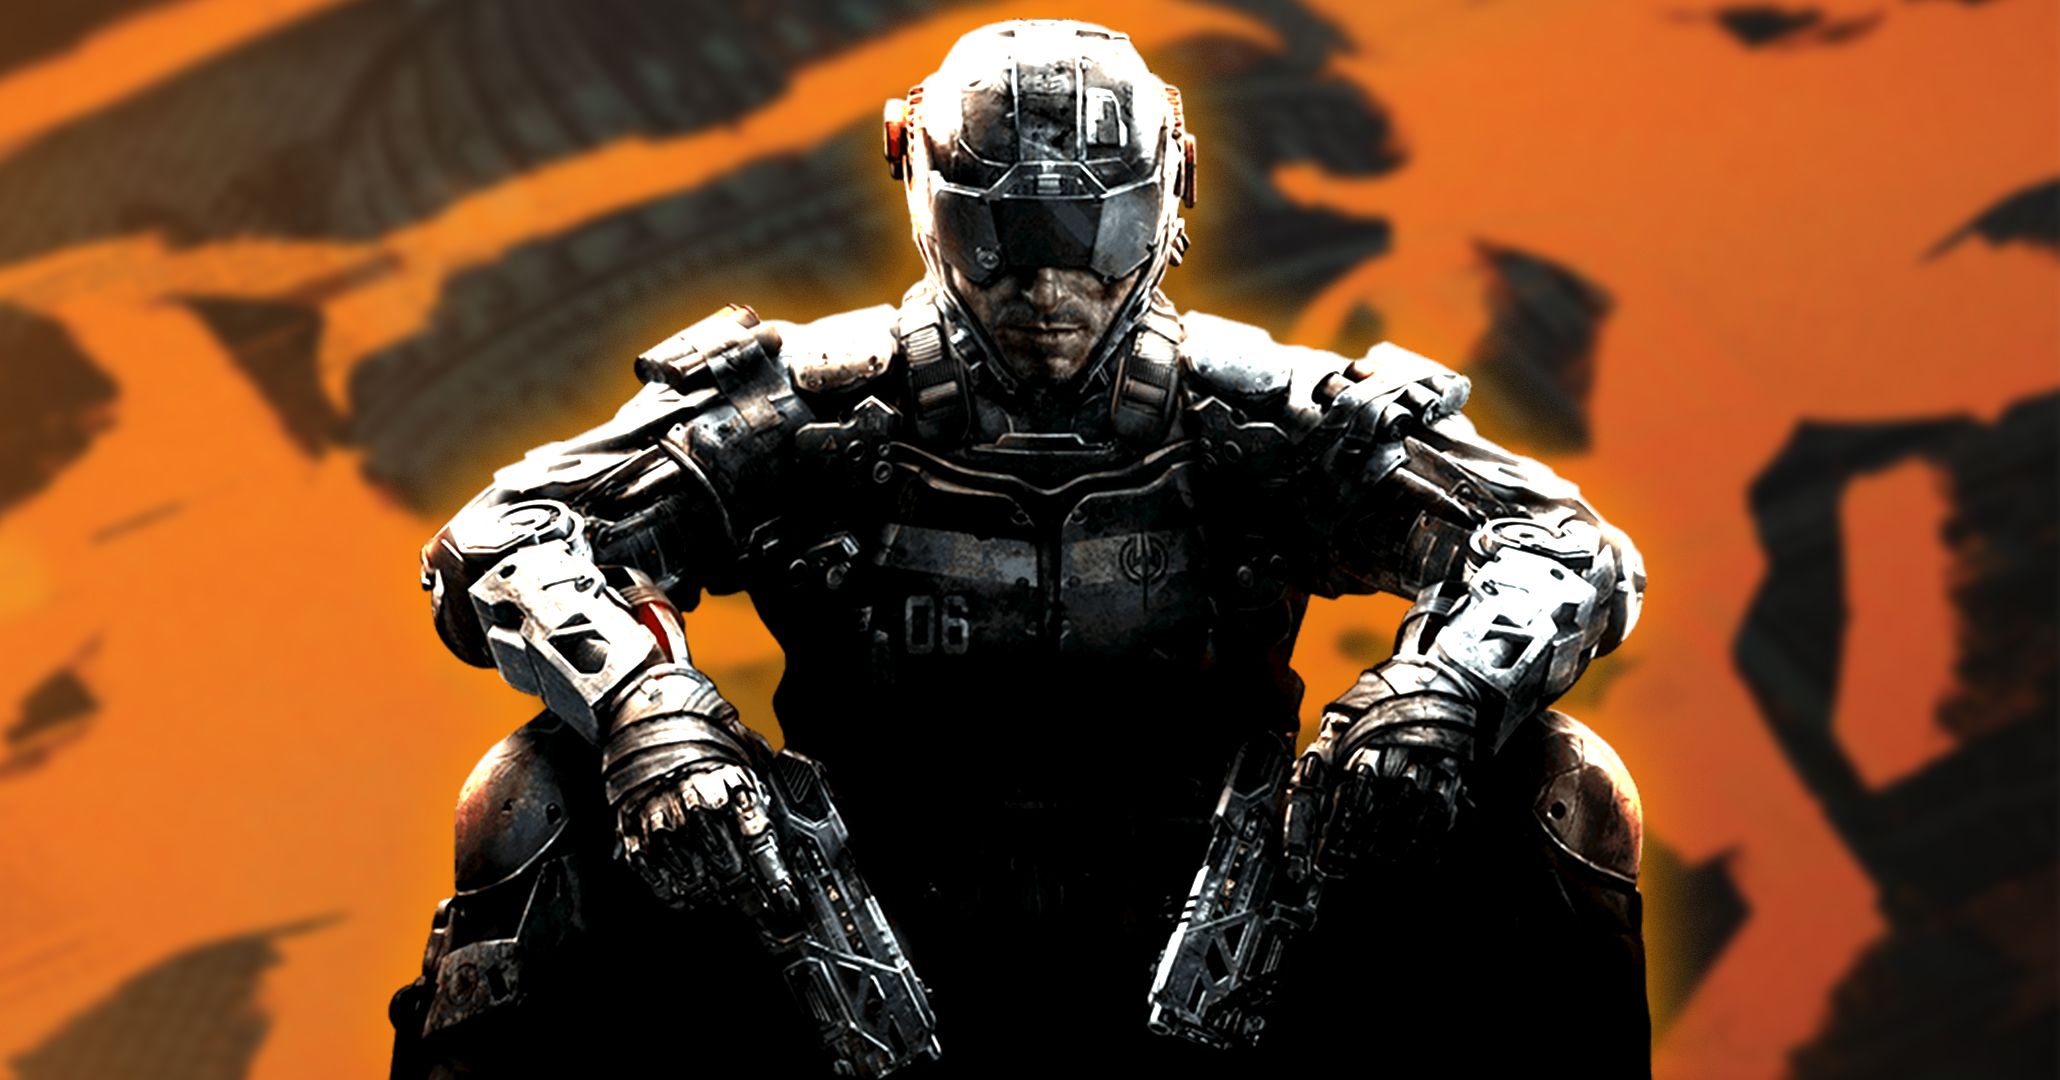 Call of Duty Black Ops character in front of a teaser image for an upcoming showcase.